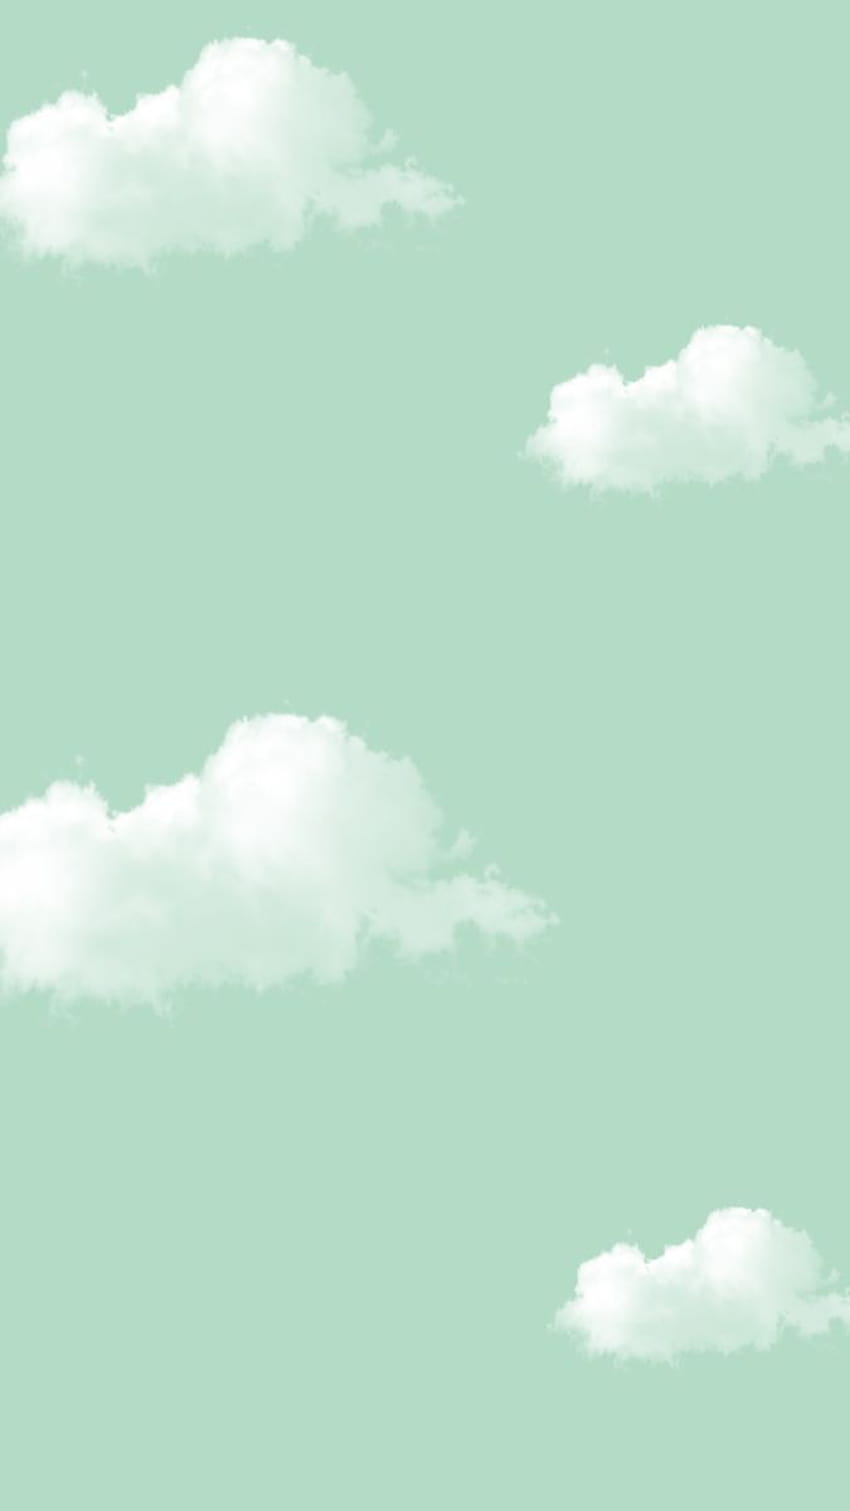 A green background with white clouds - Mint green